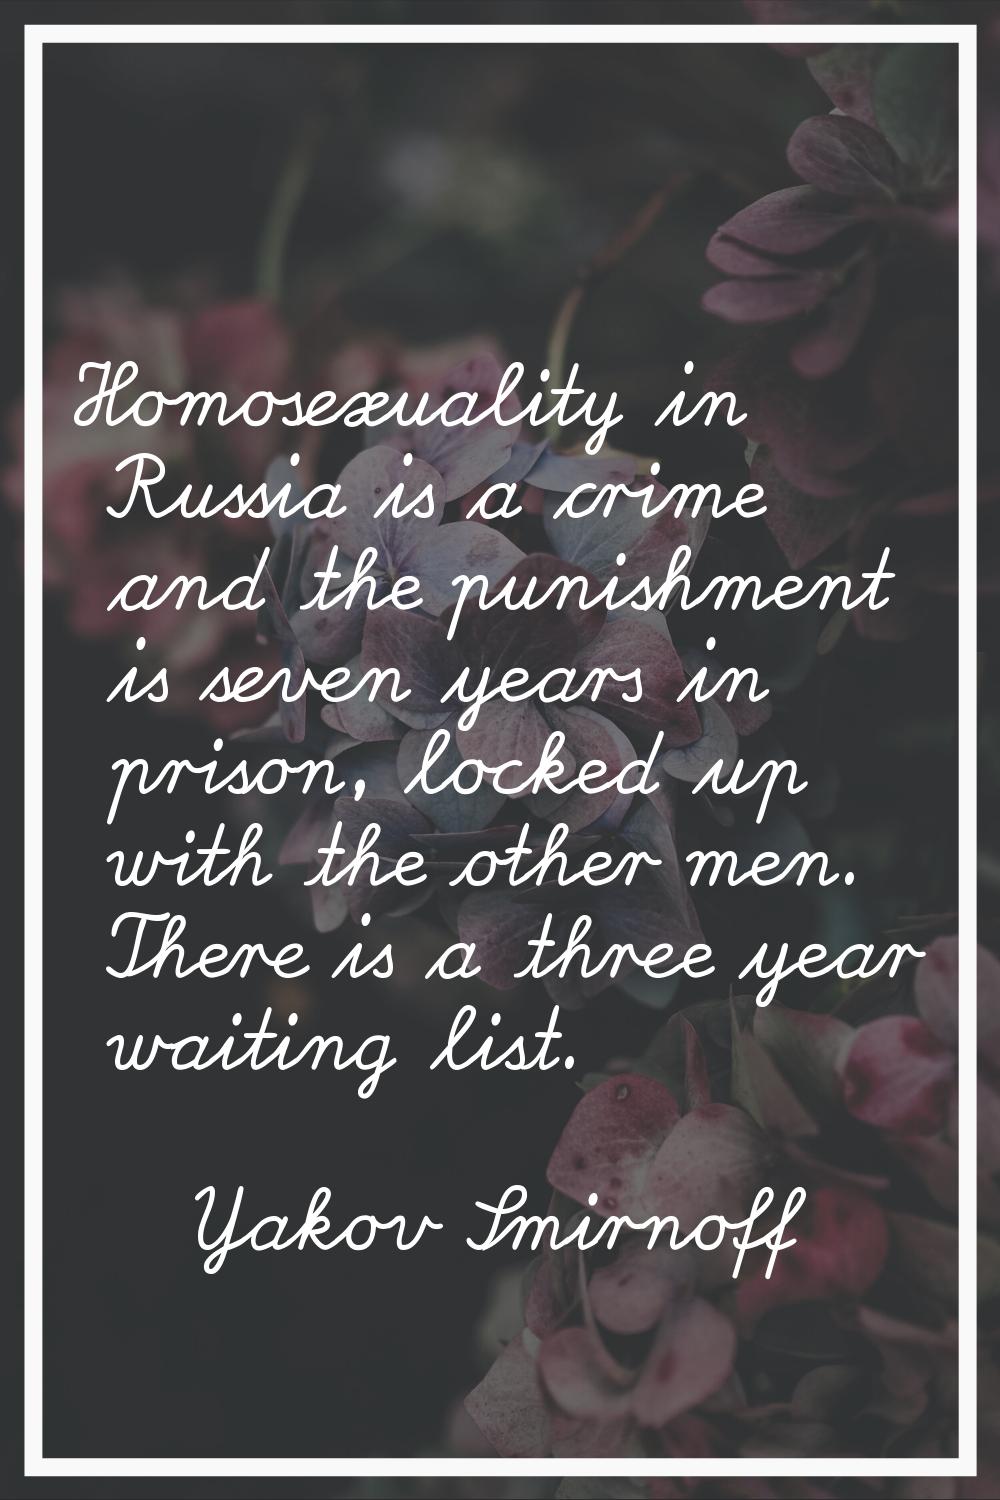 Homosexuality in Russia is a crime and the punishment is seven years in prison, locked up with the 